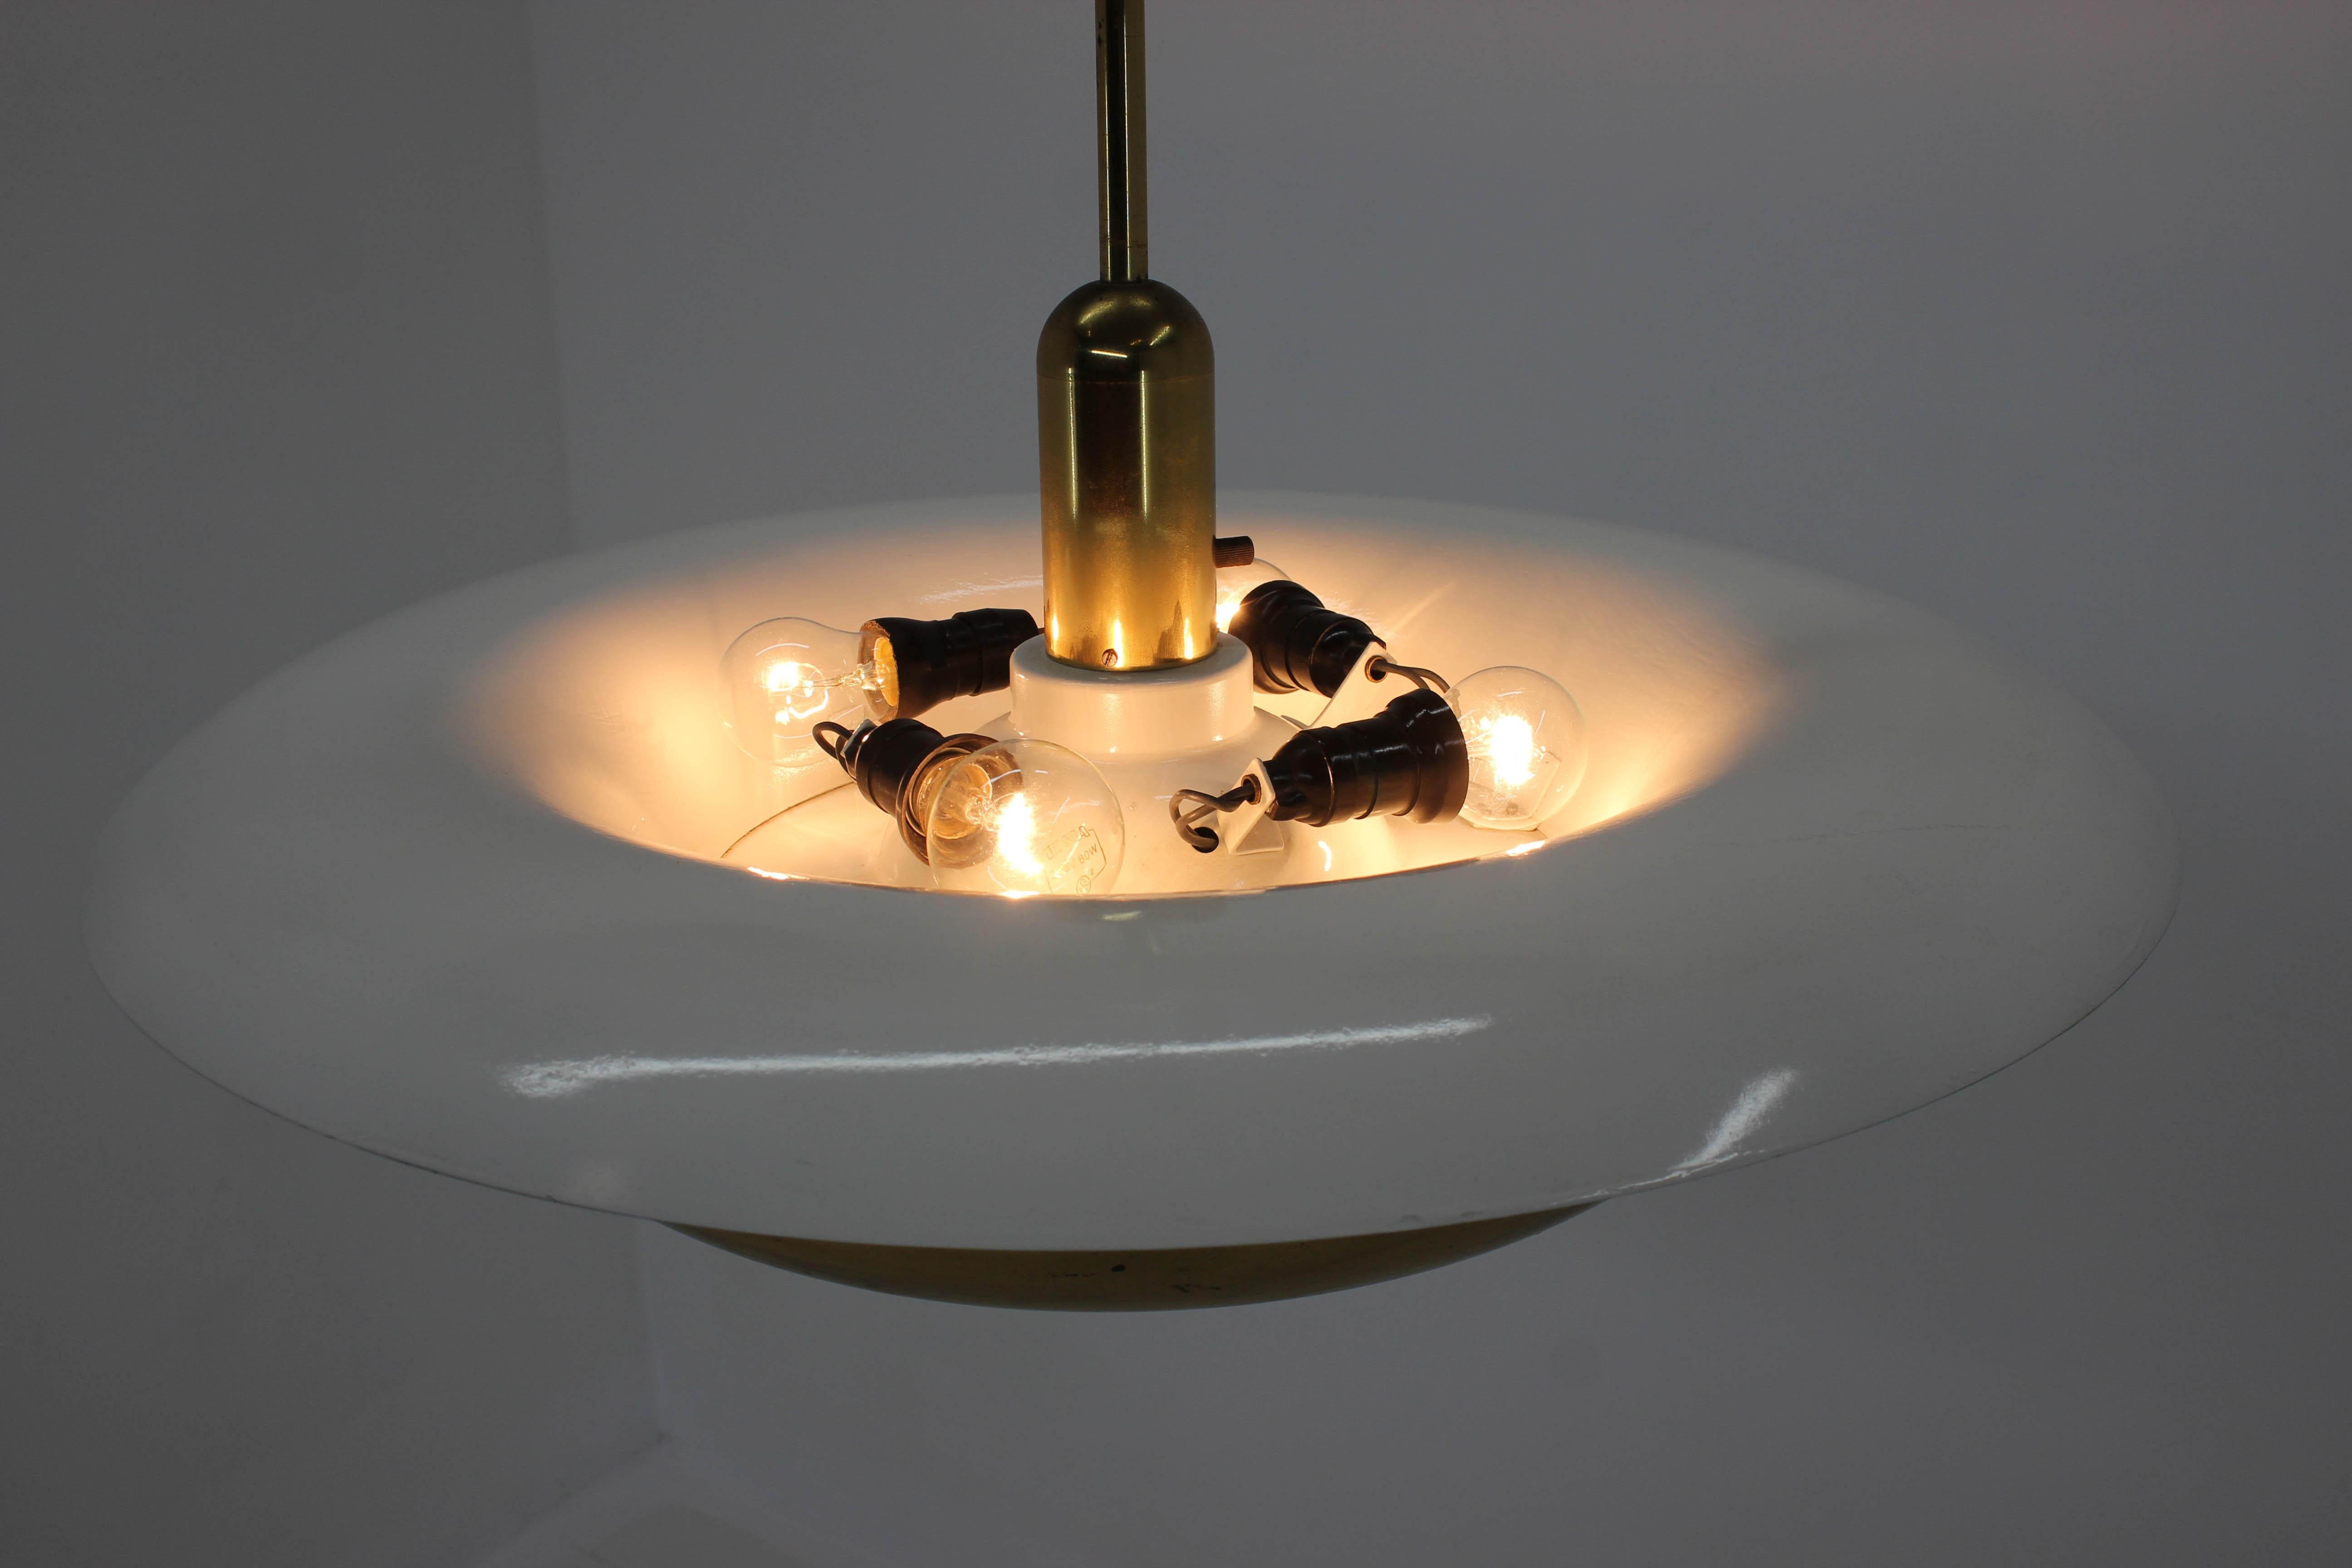 European Large Bauhaus Chandelier with Adjustable Central Bulb and Two Indirect Lights